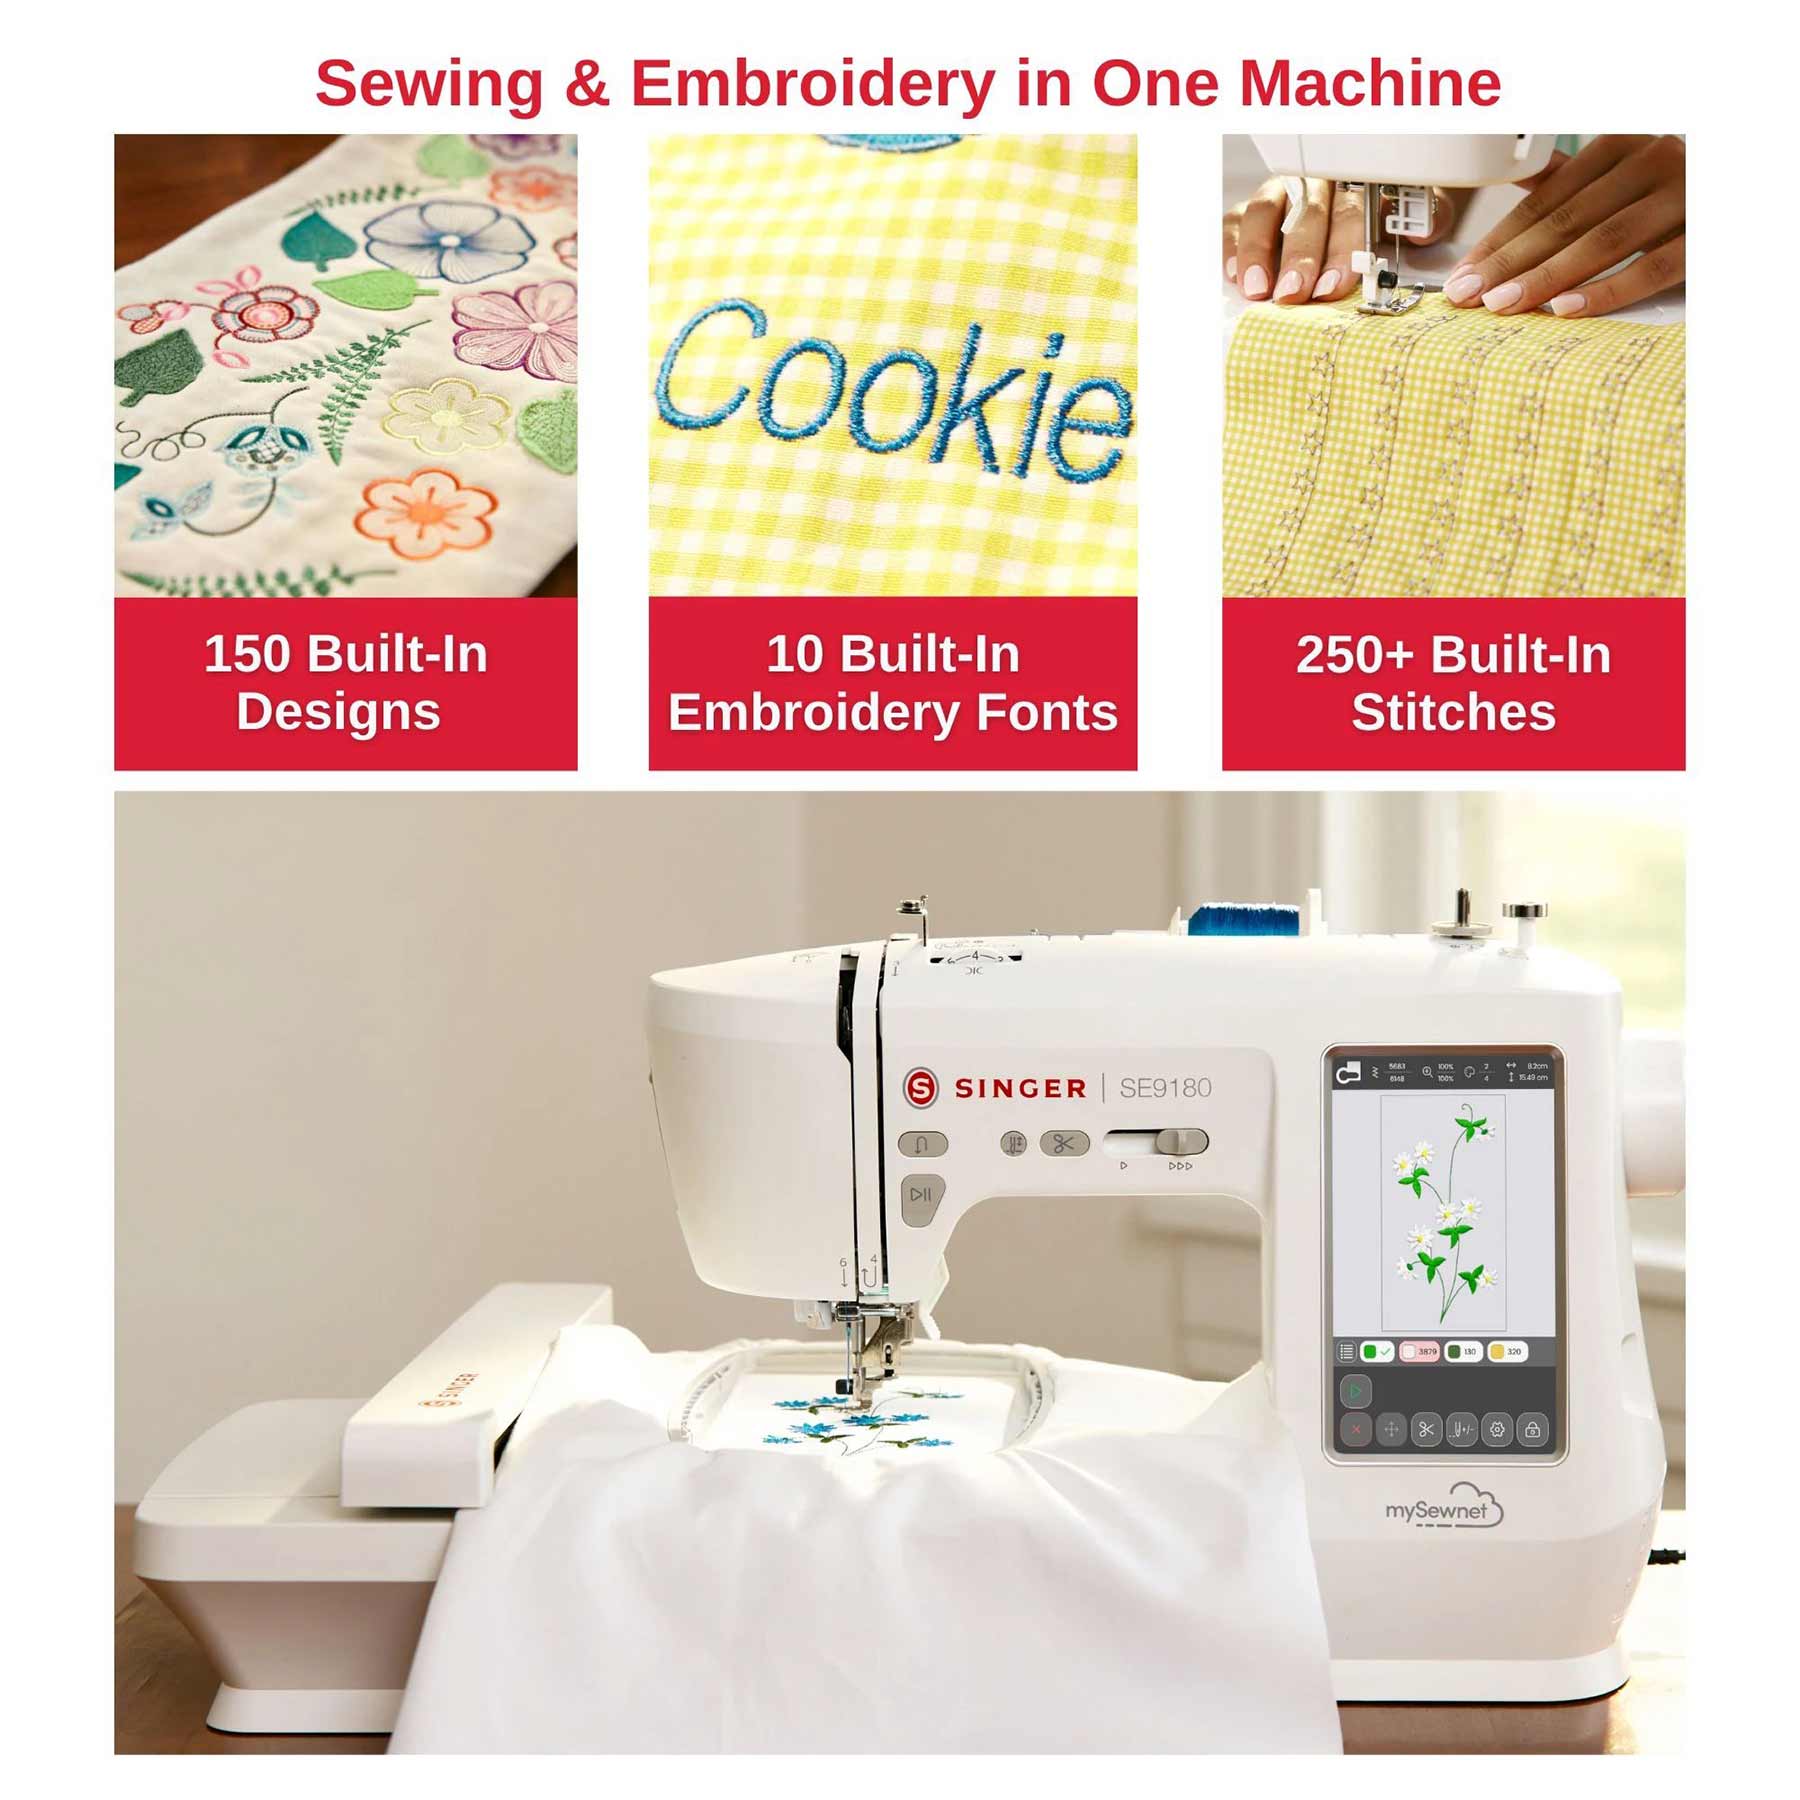 SINGER® SE9180 Sewing & Embroidery Machine